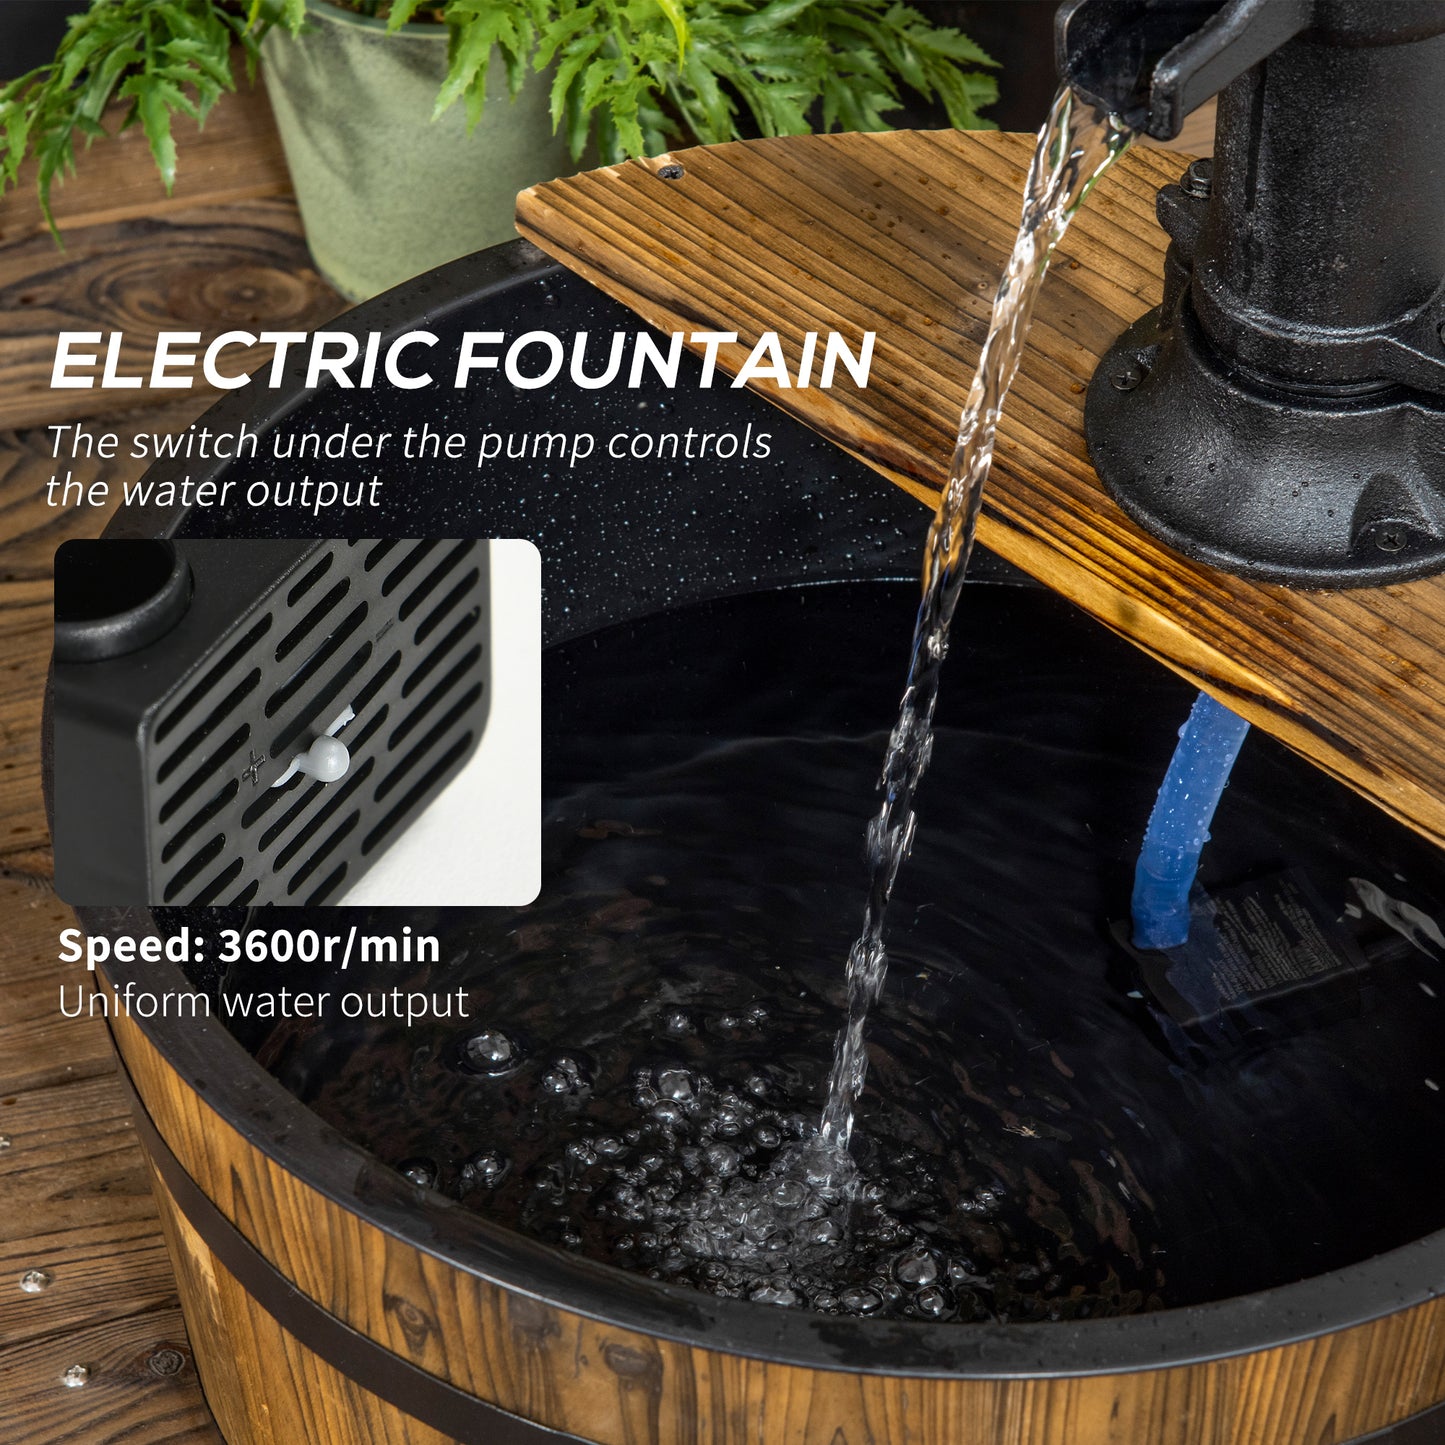 Outsunny 1 Tier Wooden Barrel Water Fountain Outdoor Garden Decorative Water Feature w/ Electric Pump